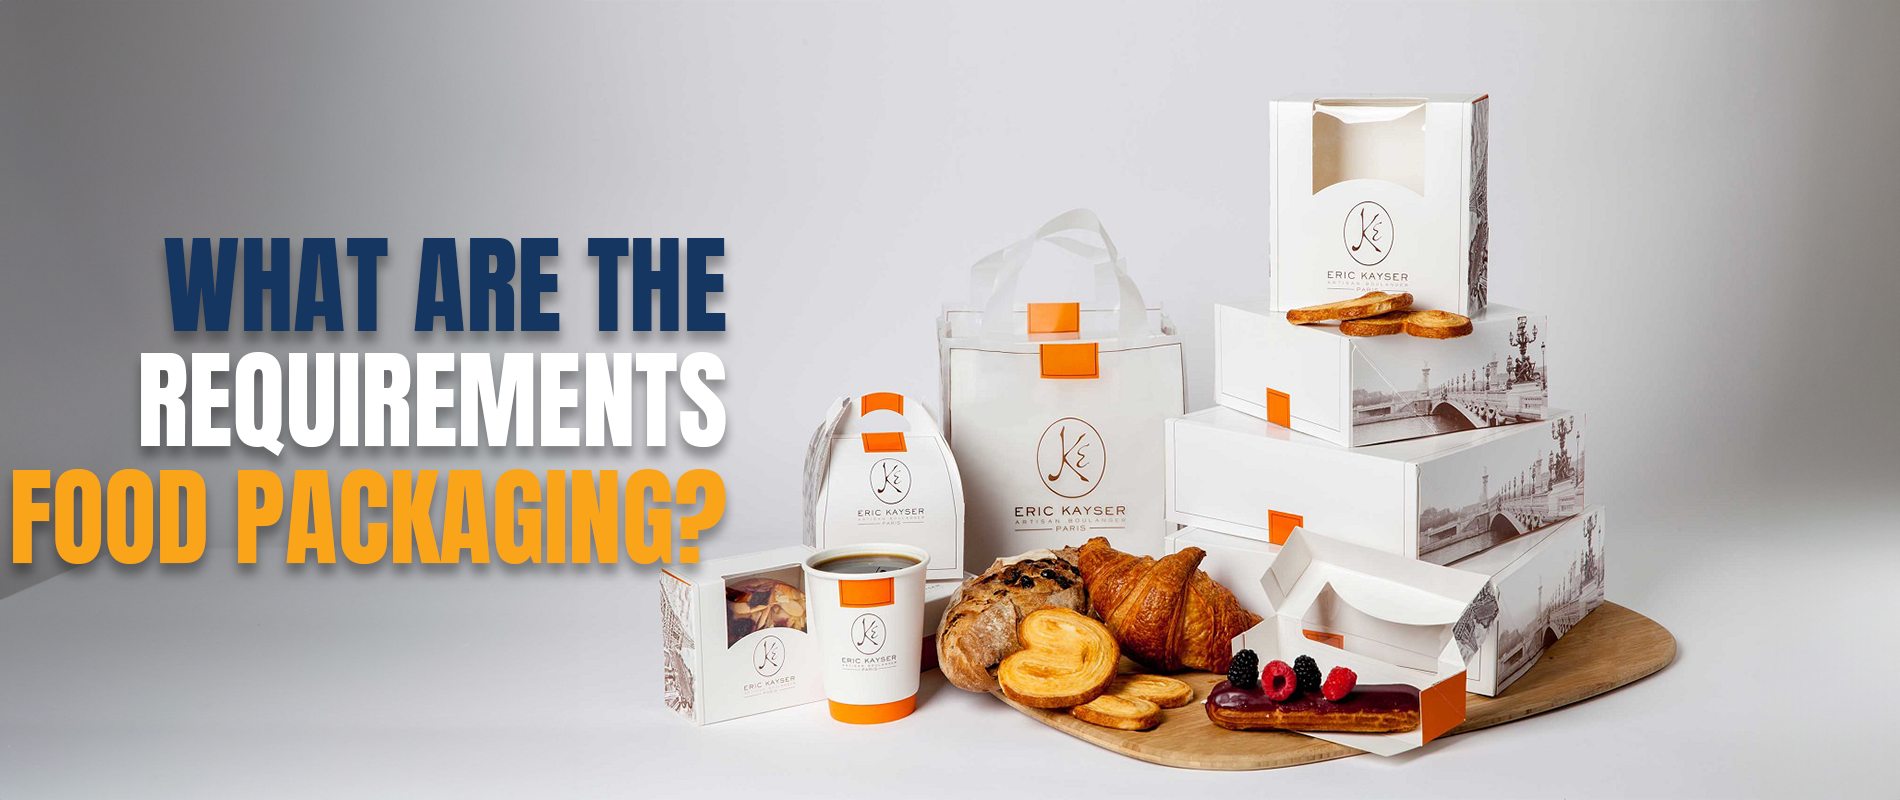 What Are The Requirements For Food Packaging